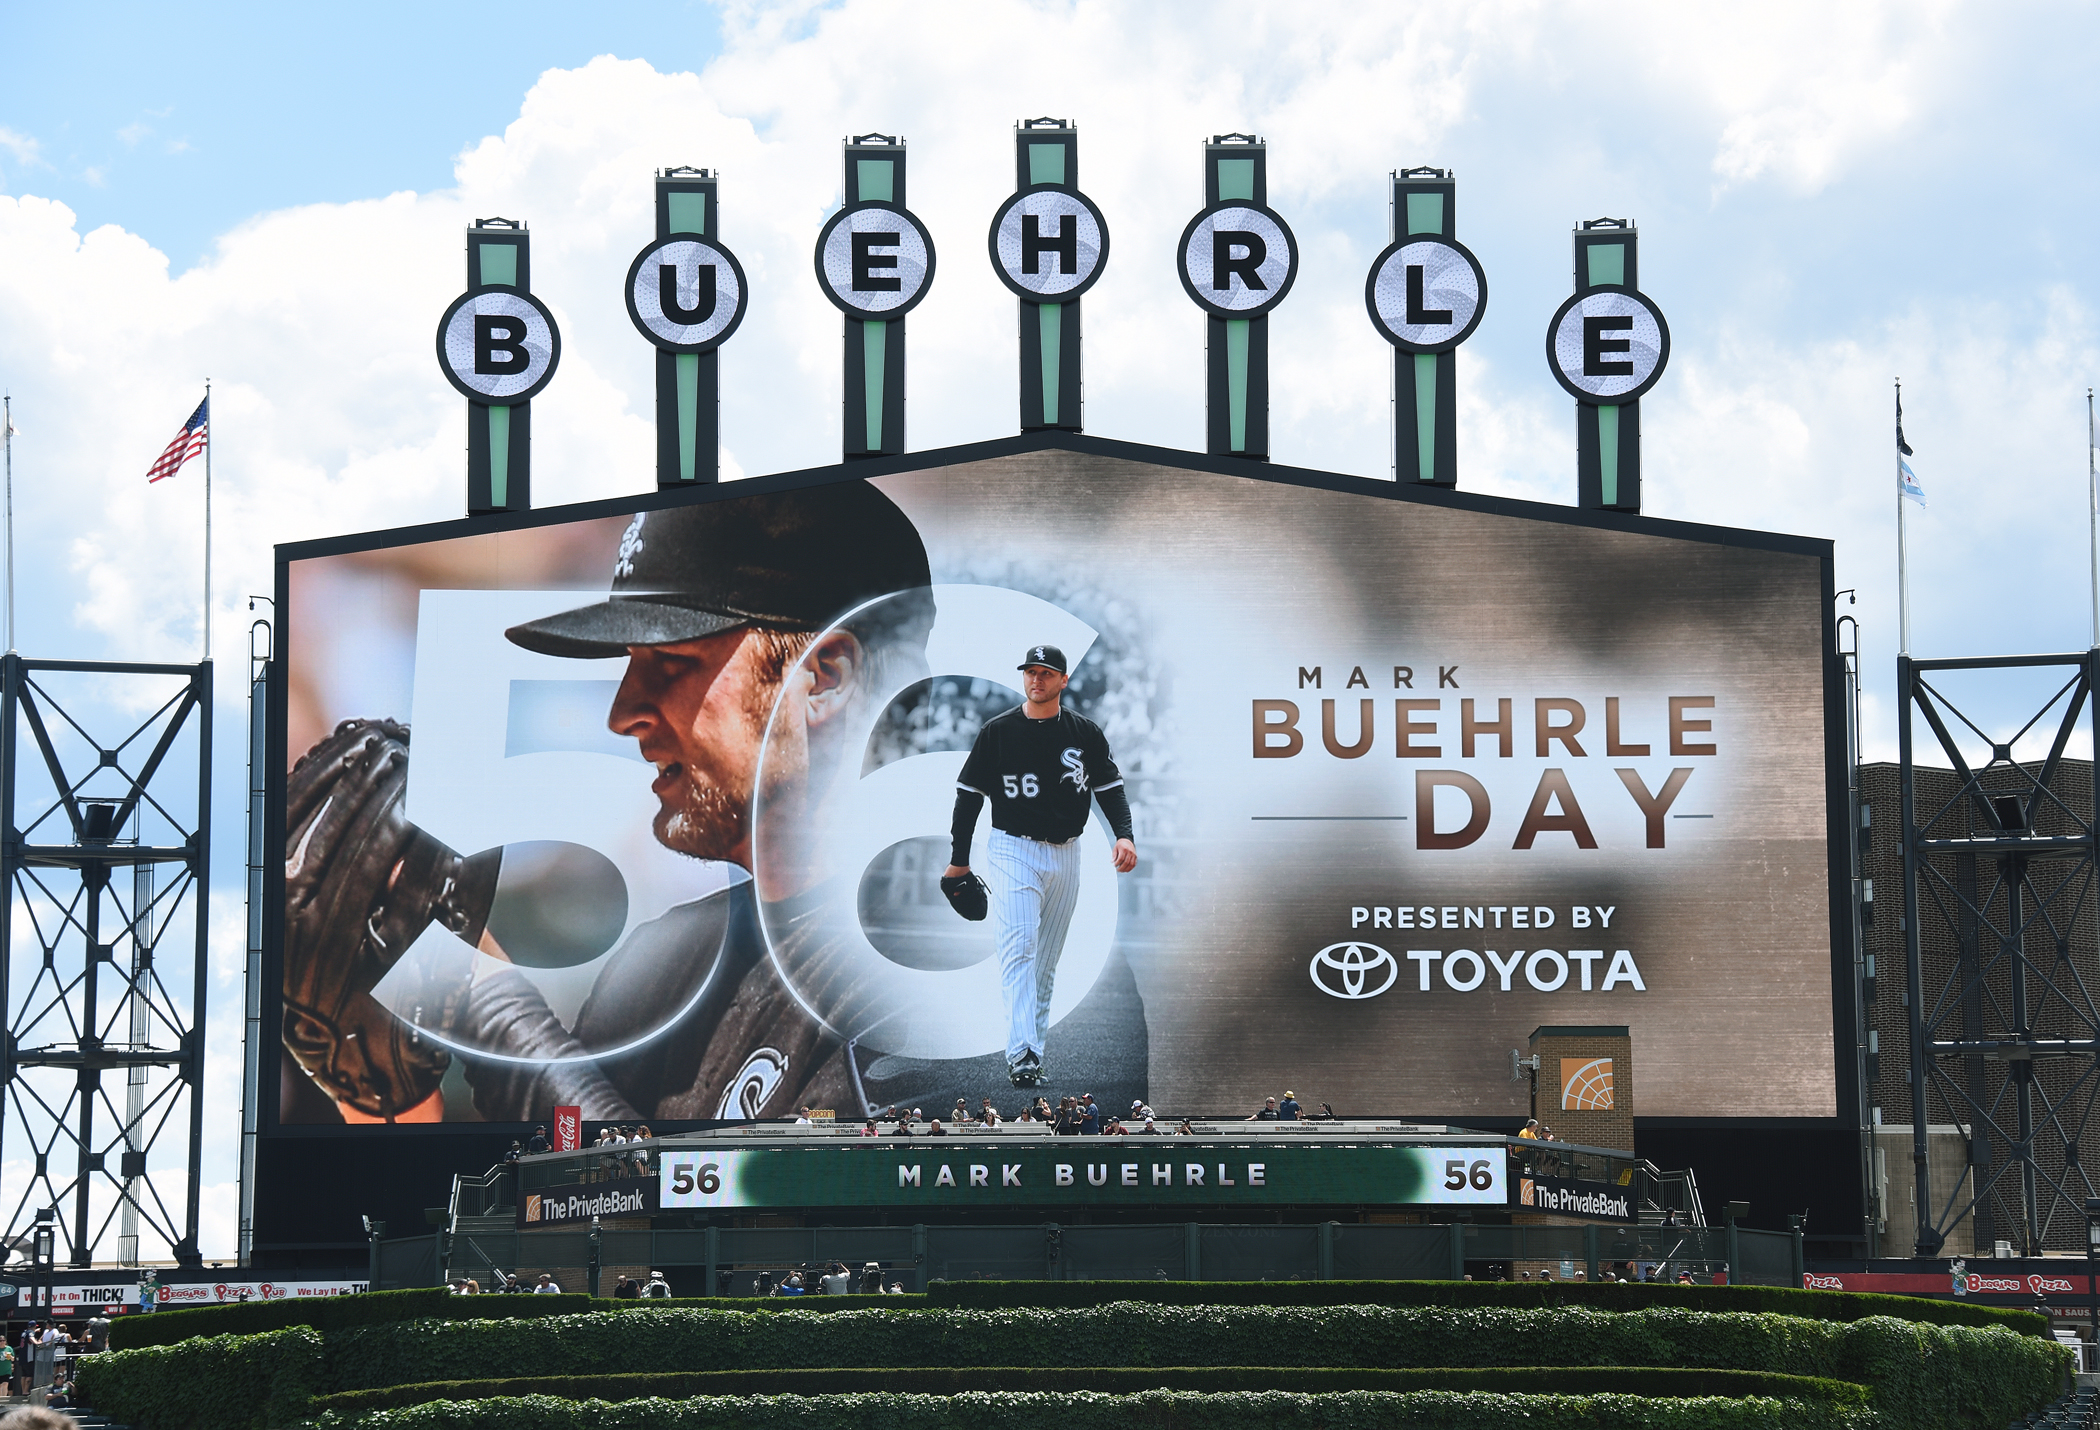 White Sox retire former star pitcher Buehrle's No. 56 jersey